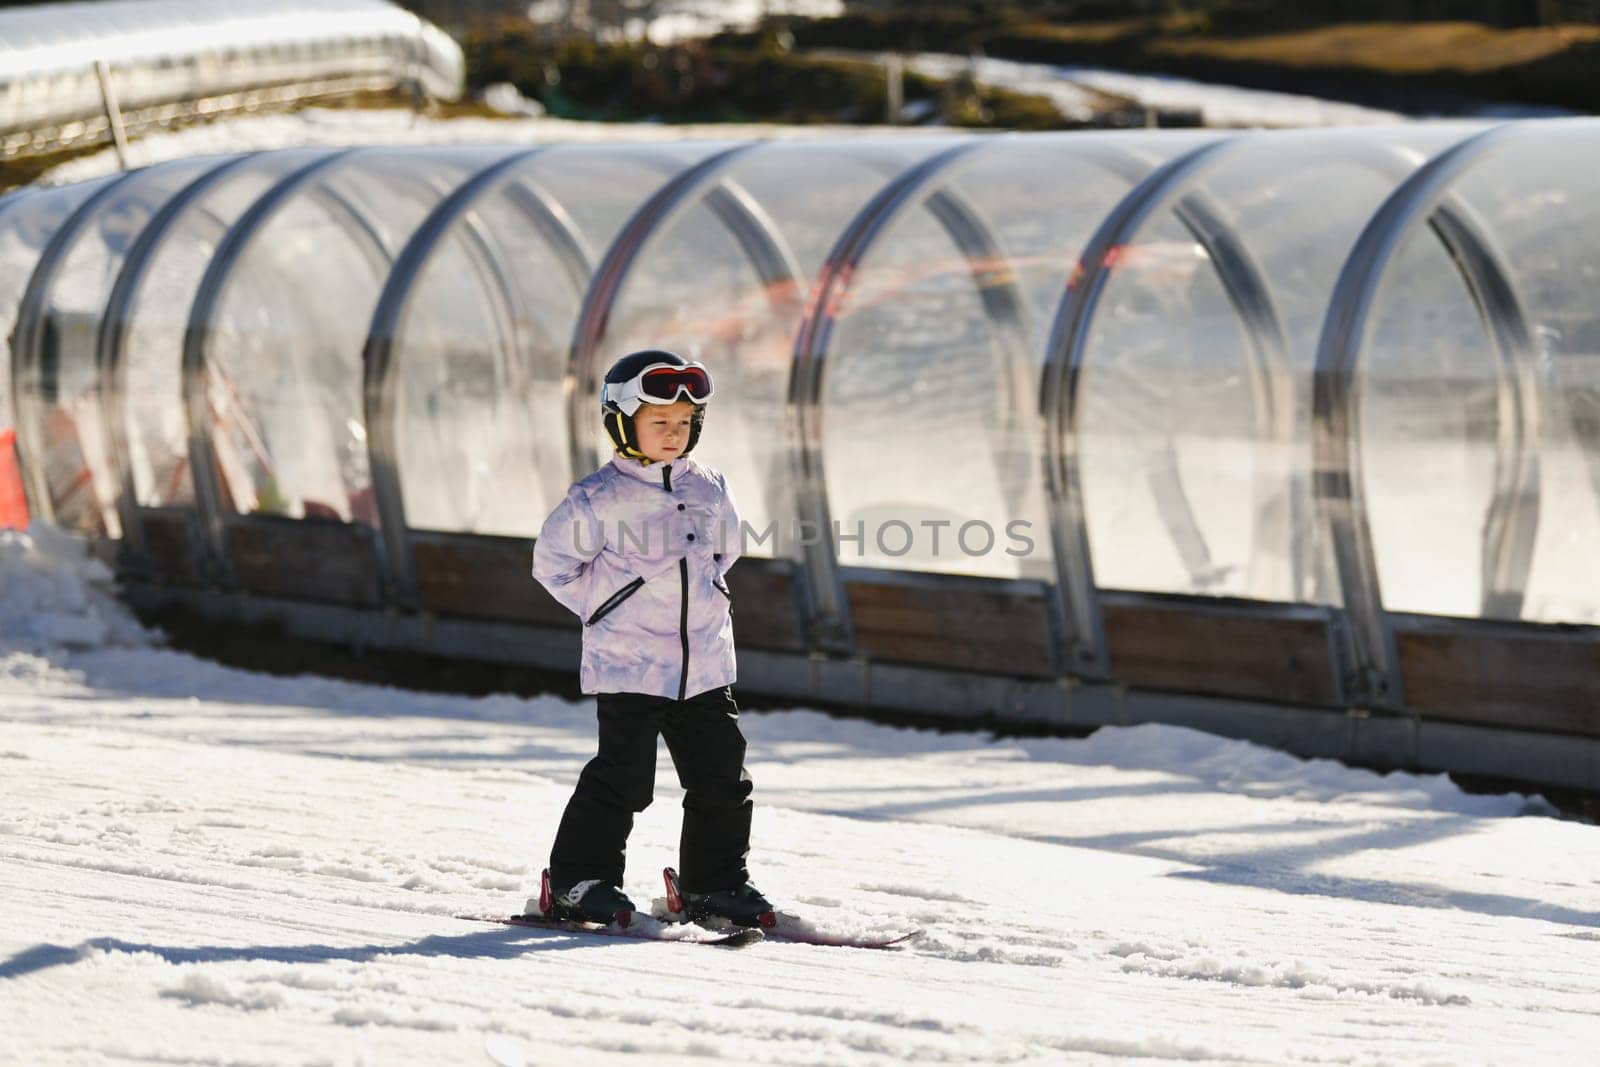 A six-year-old girl learns to ski near lift tunnel